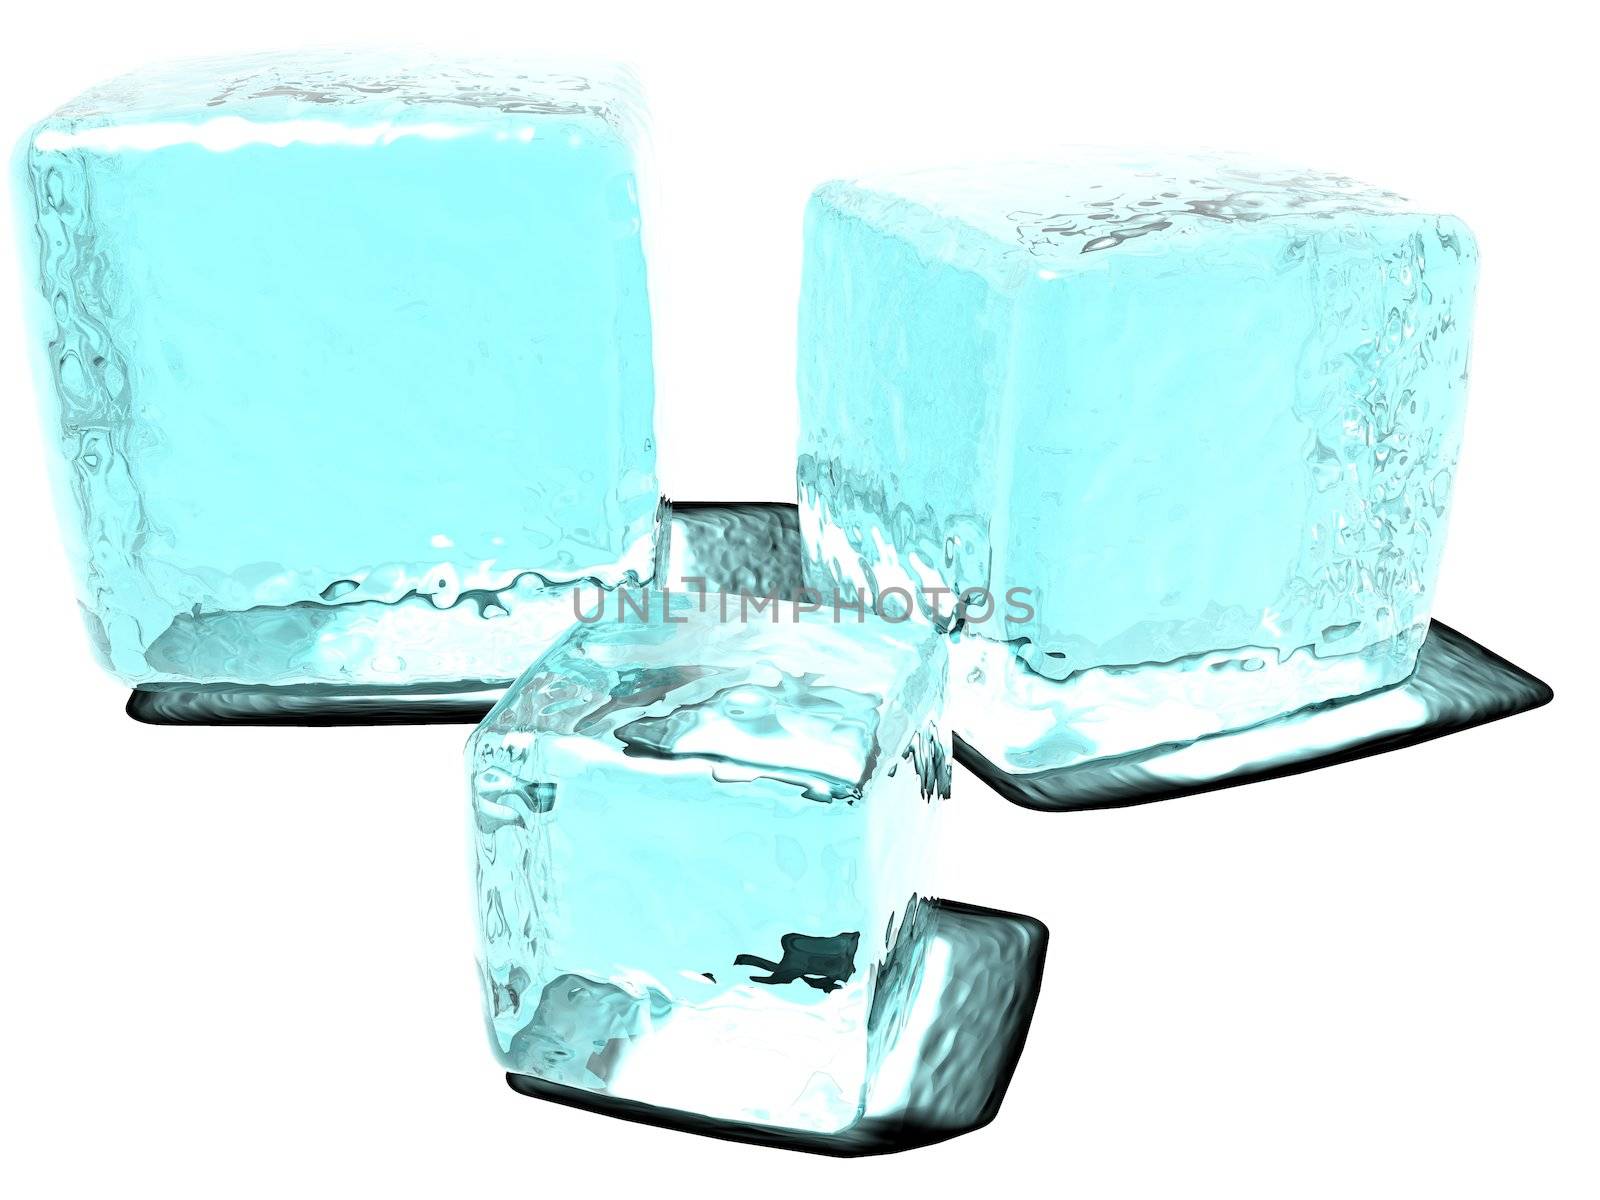 An illustration of blue ice cubes on a white surface and background with light shinny through them.